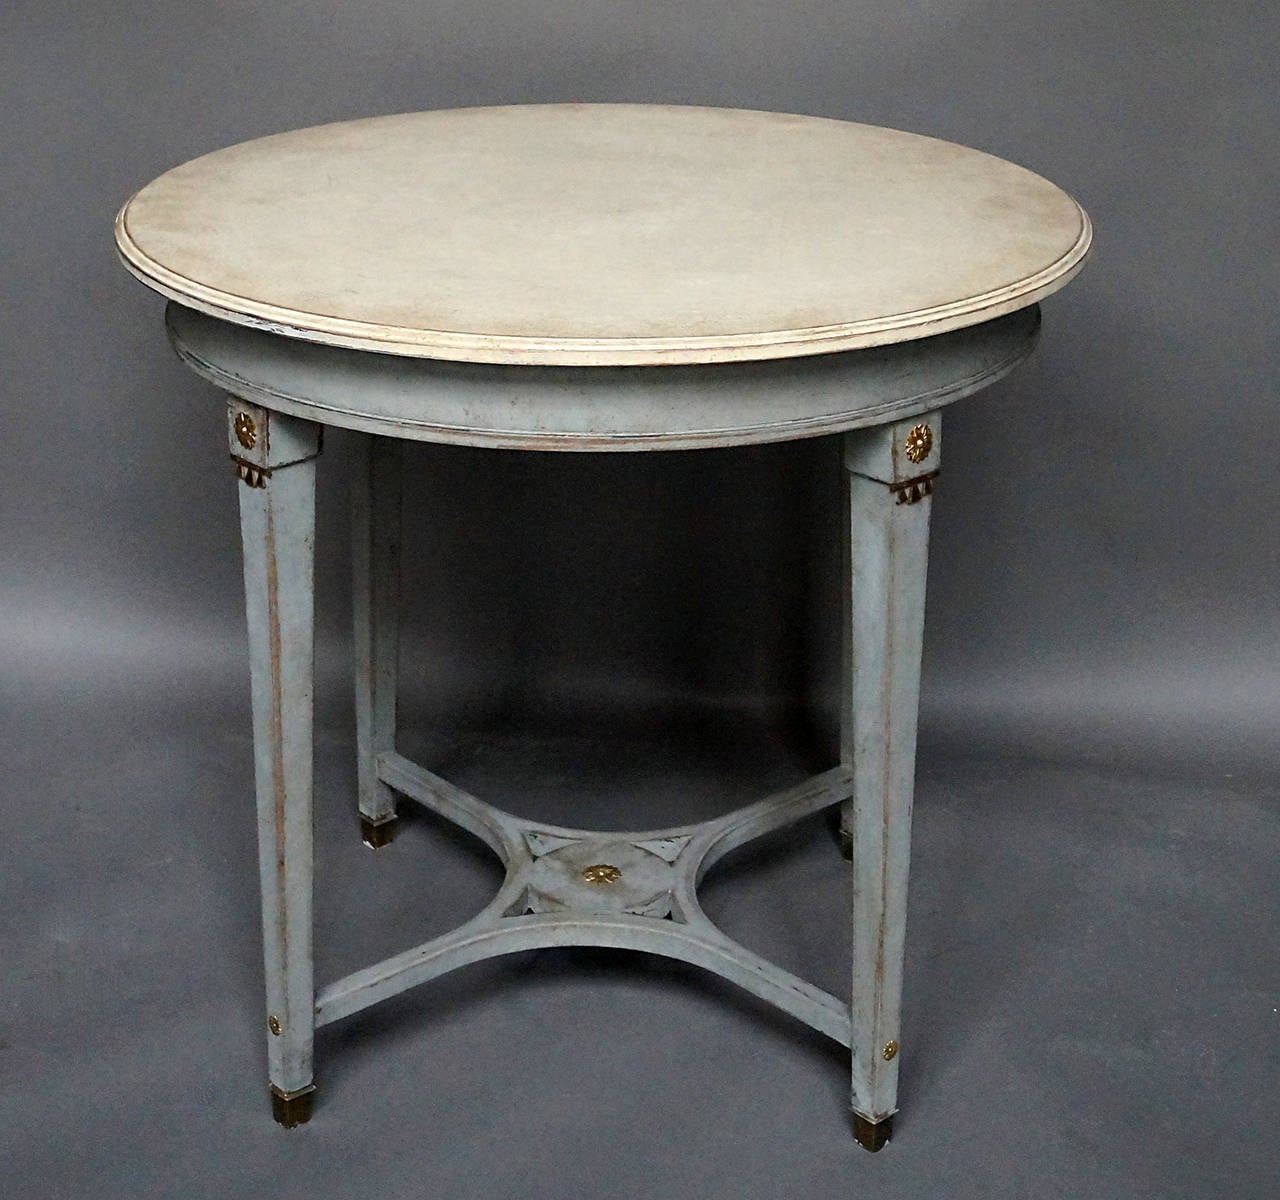 Round side table, Sweden circa 1880, with tapering legs accented at top and bottom with brass fittings. Saltire stretcher with central medallion.